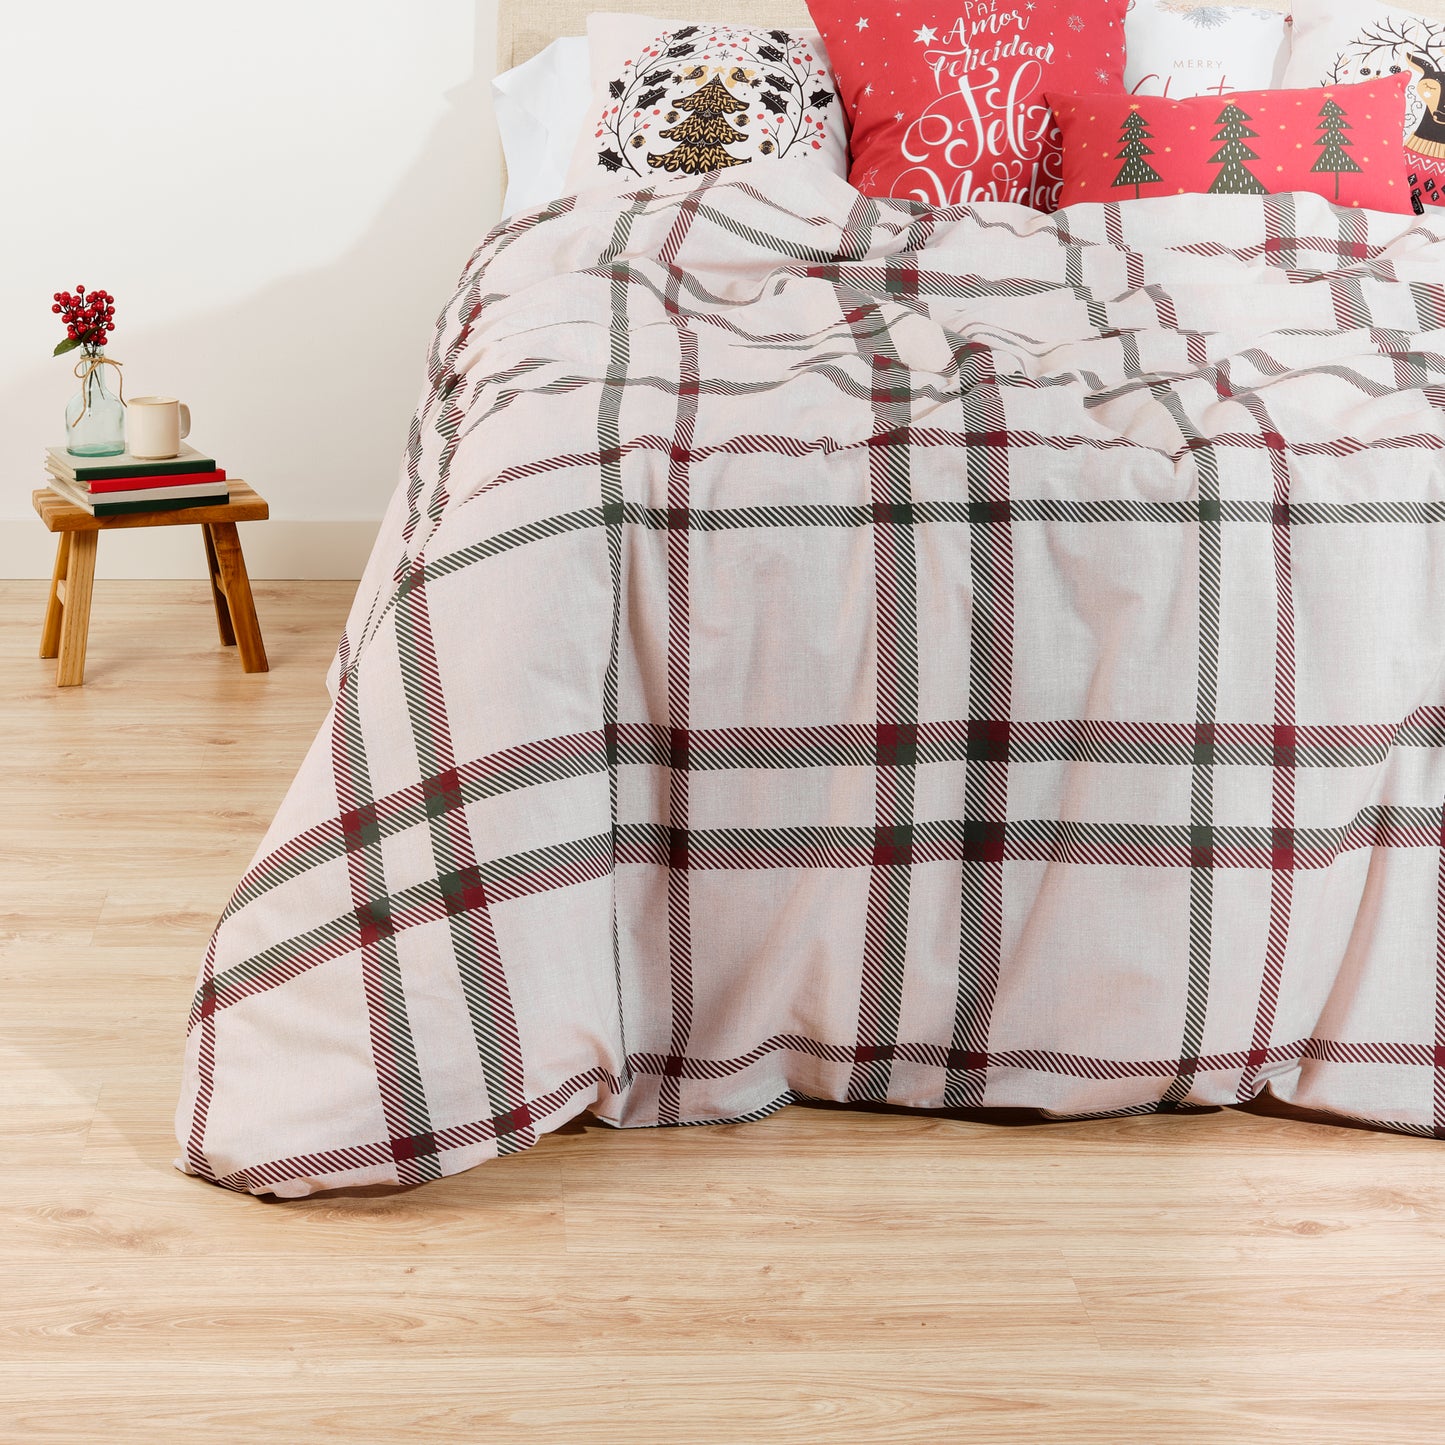 Duvet cover with clicks 100% cotton Christmas pictures